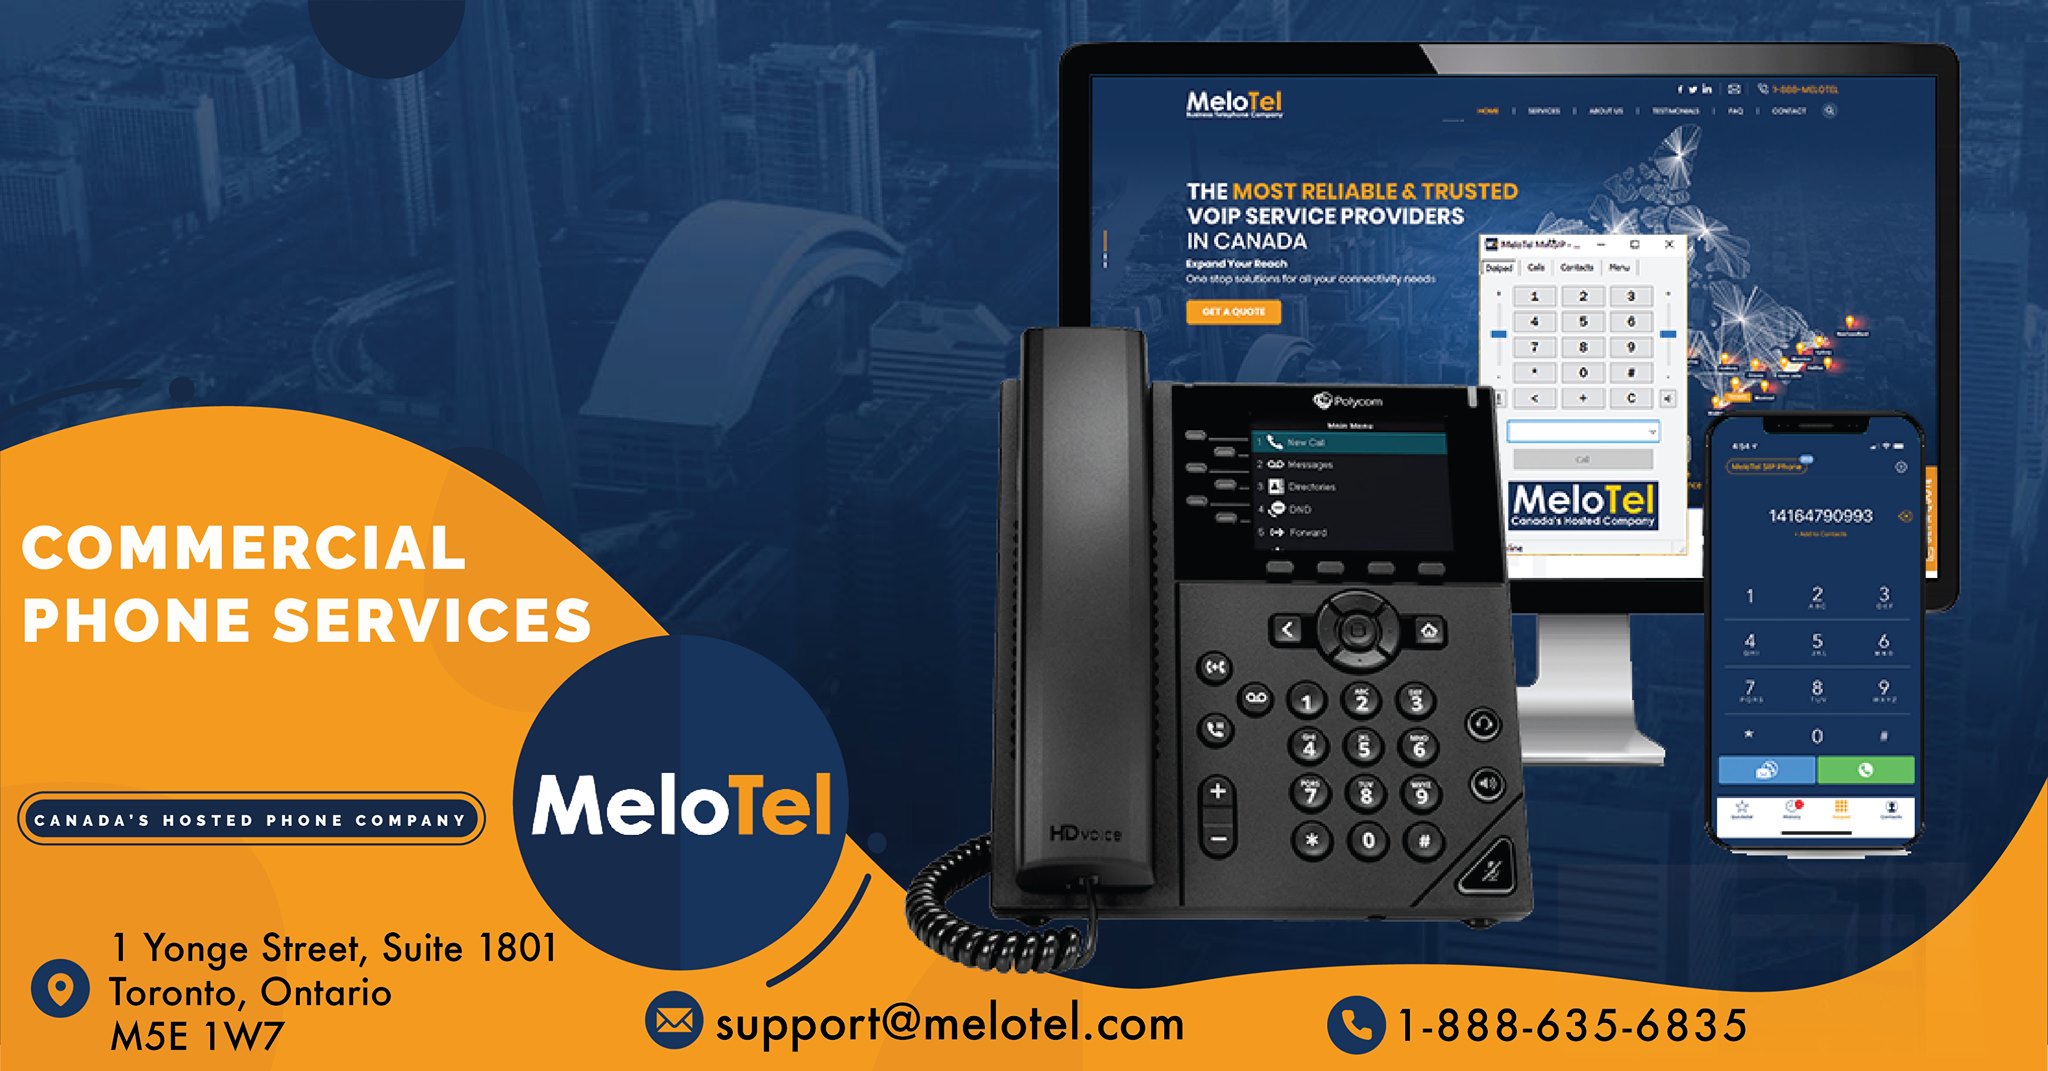 Why Should You Make The Switch To MeloTel’s Commercial Phone Services?